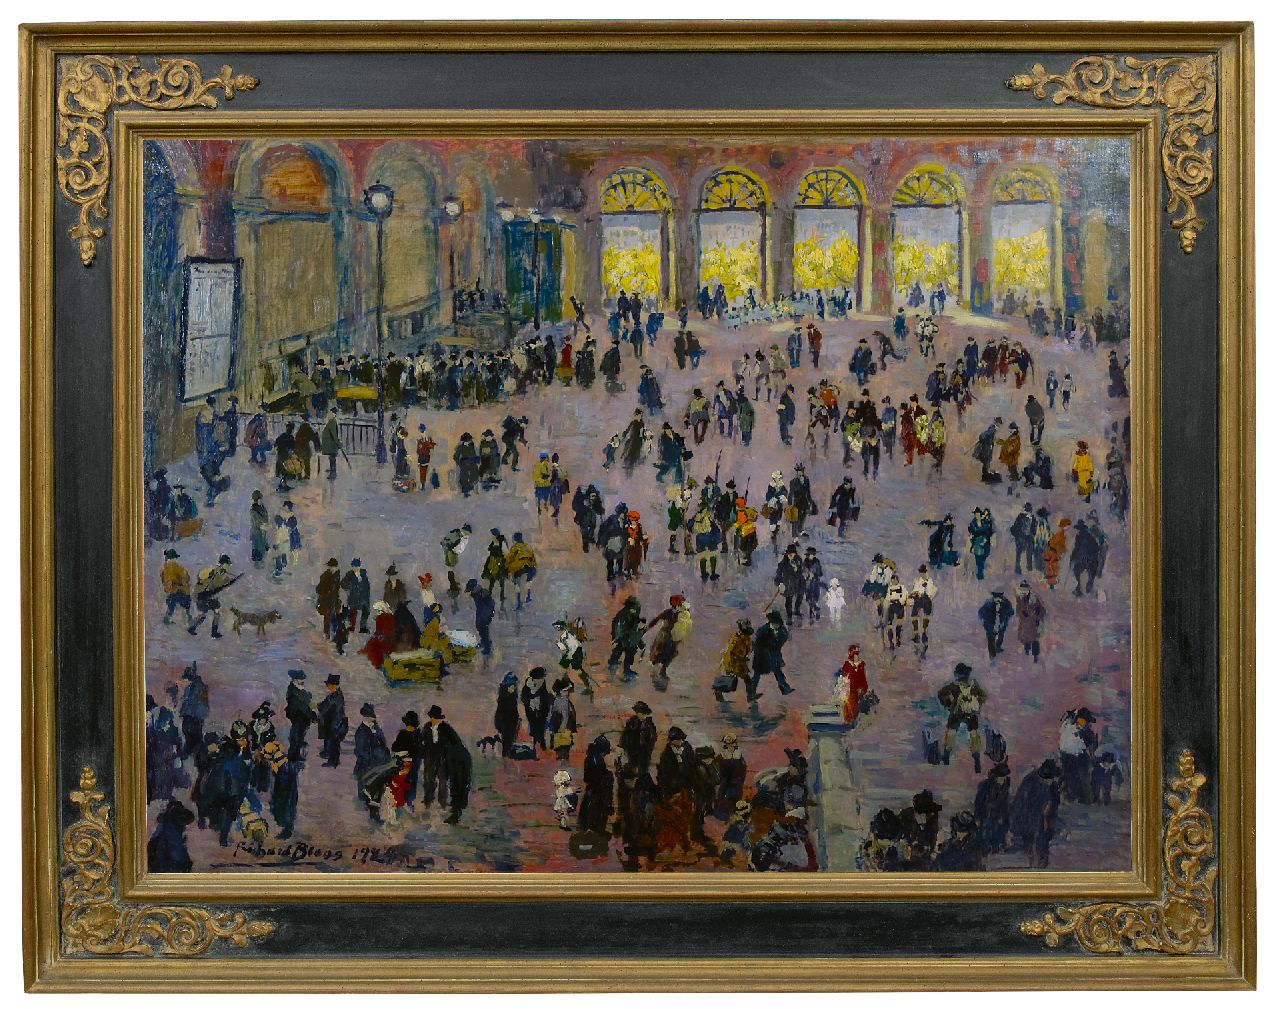 Bloos R.W.  | 'Richard' Willi Bloos, Rush hour in the 'Südbahnhof', Vienna, oil on canvas 90.3 x 118.2 cm, signed l.l. and dated 1929